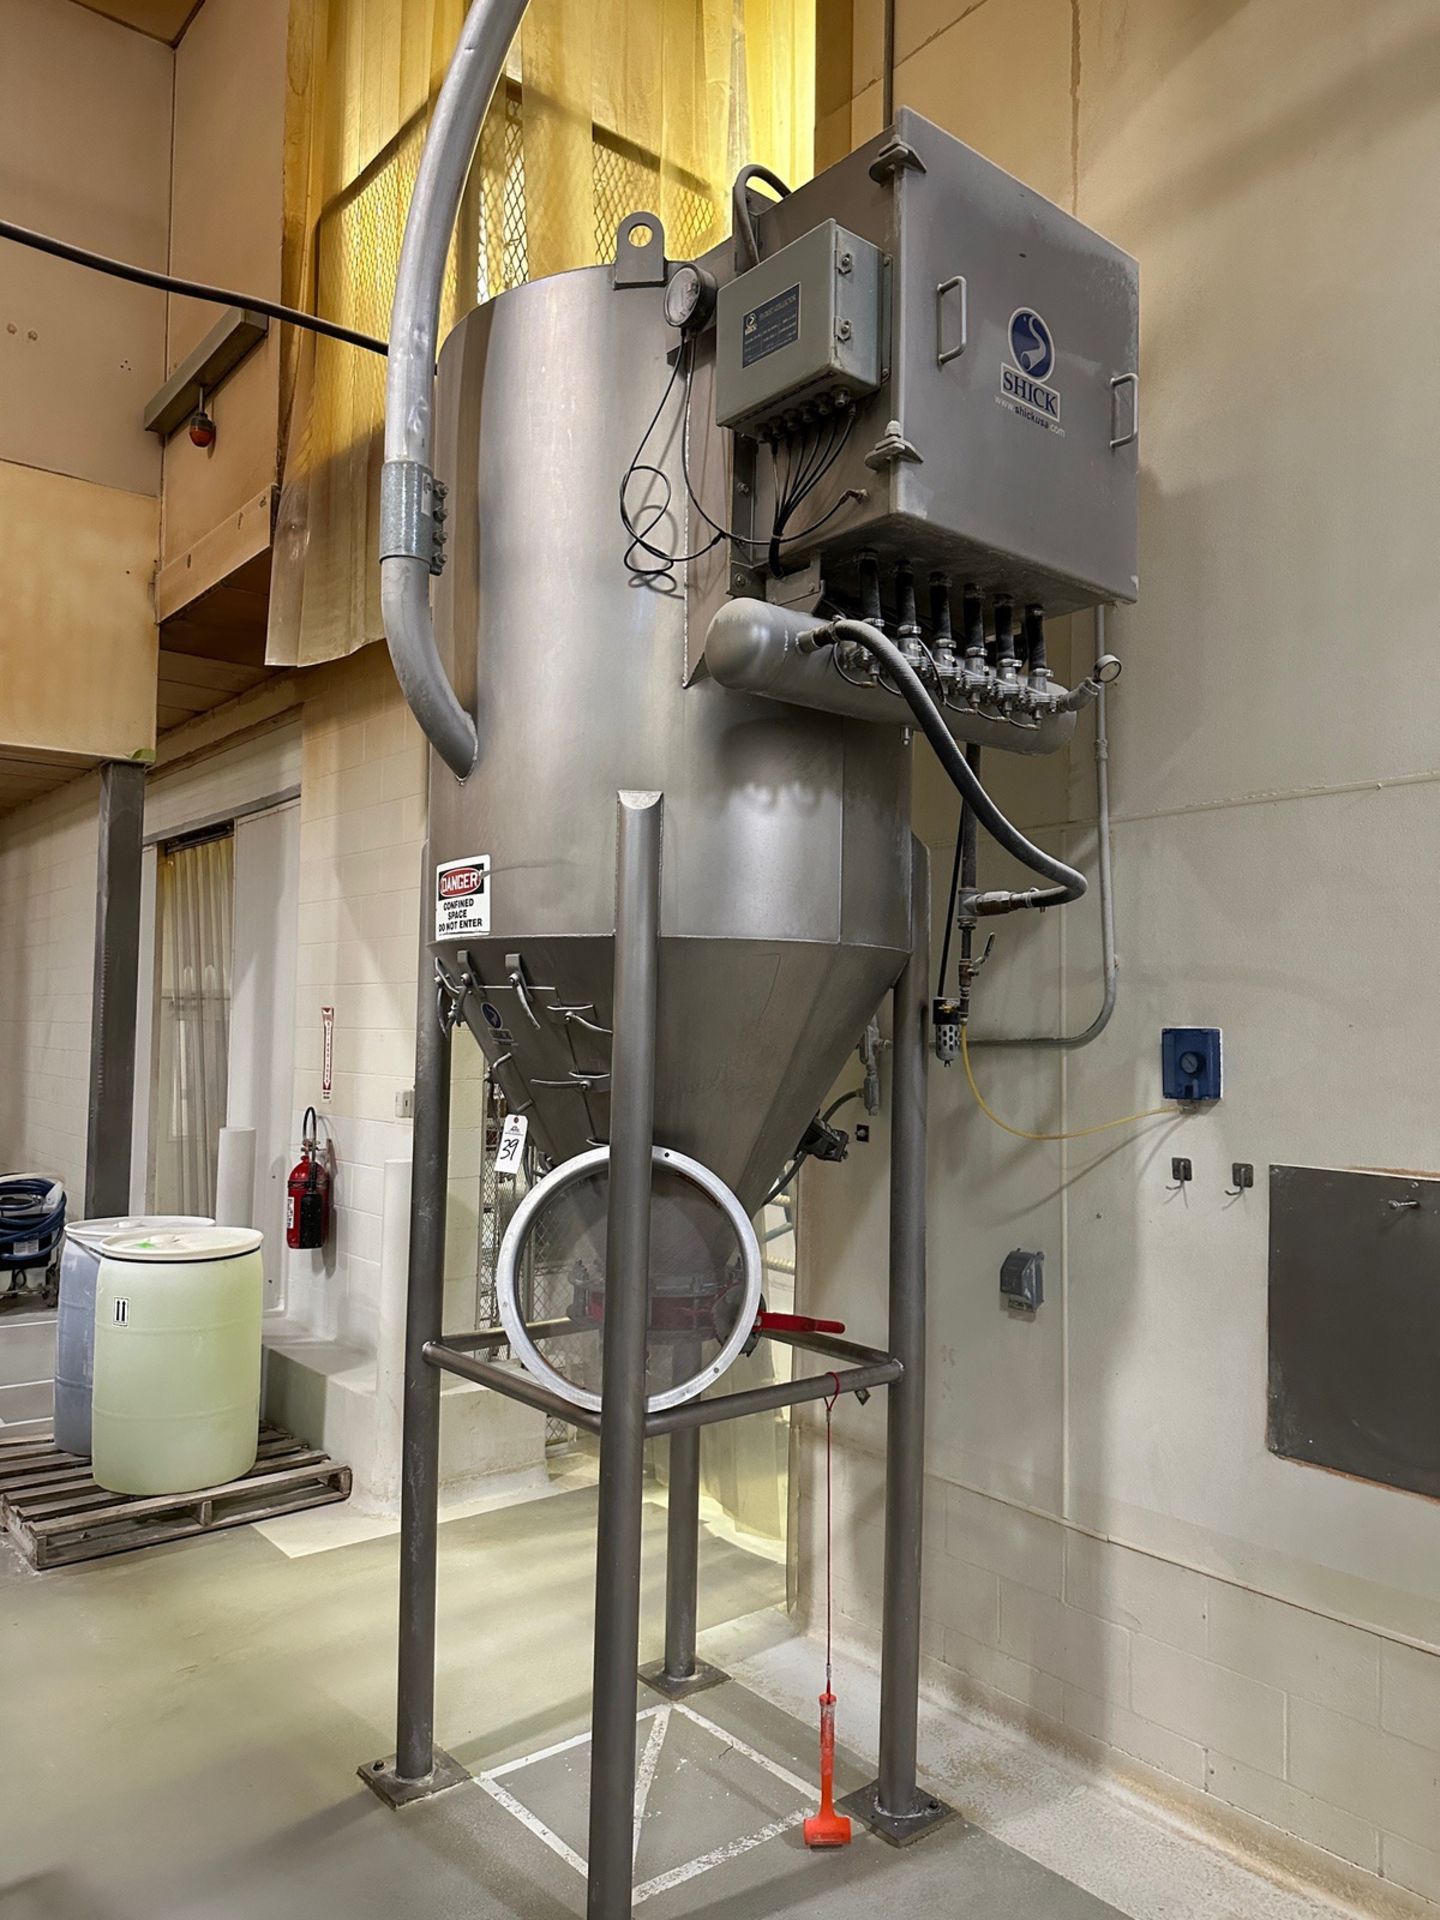 Shick FI-Dust Stainless Steel Dust Collector | Rig Fee $500